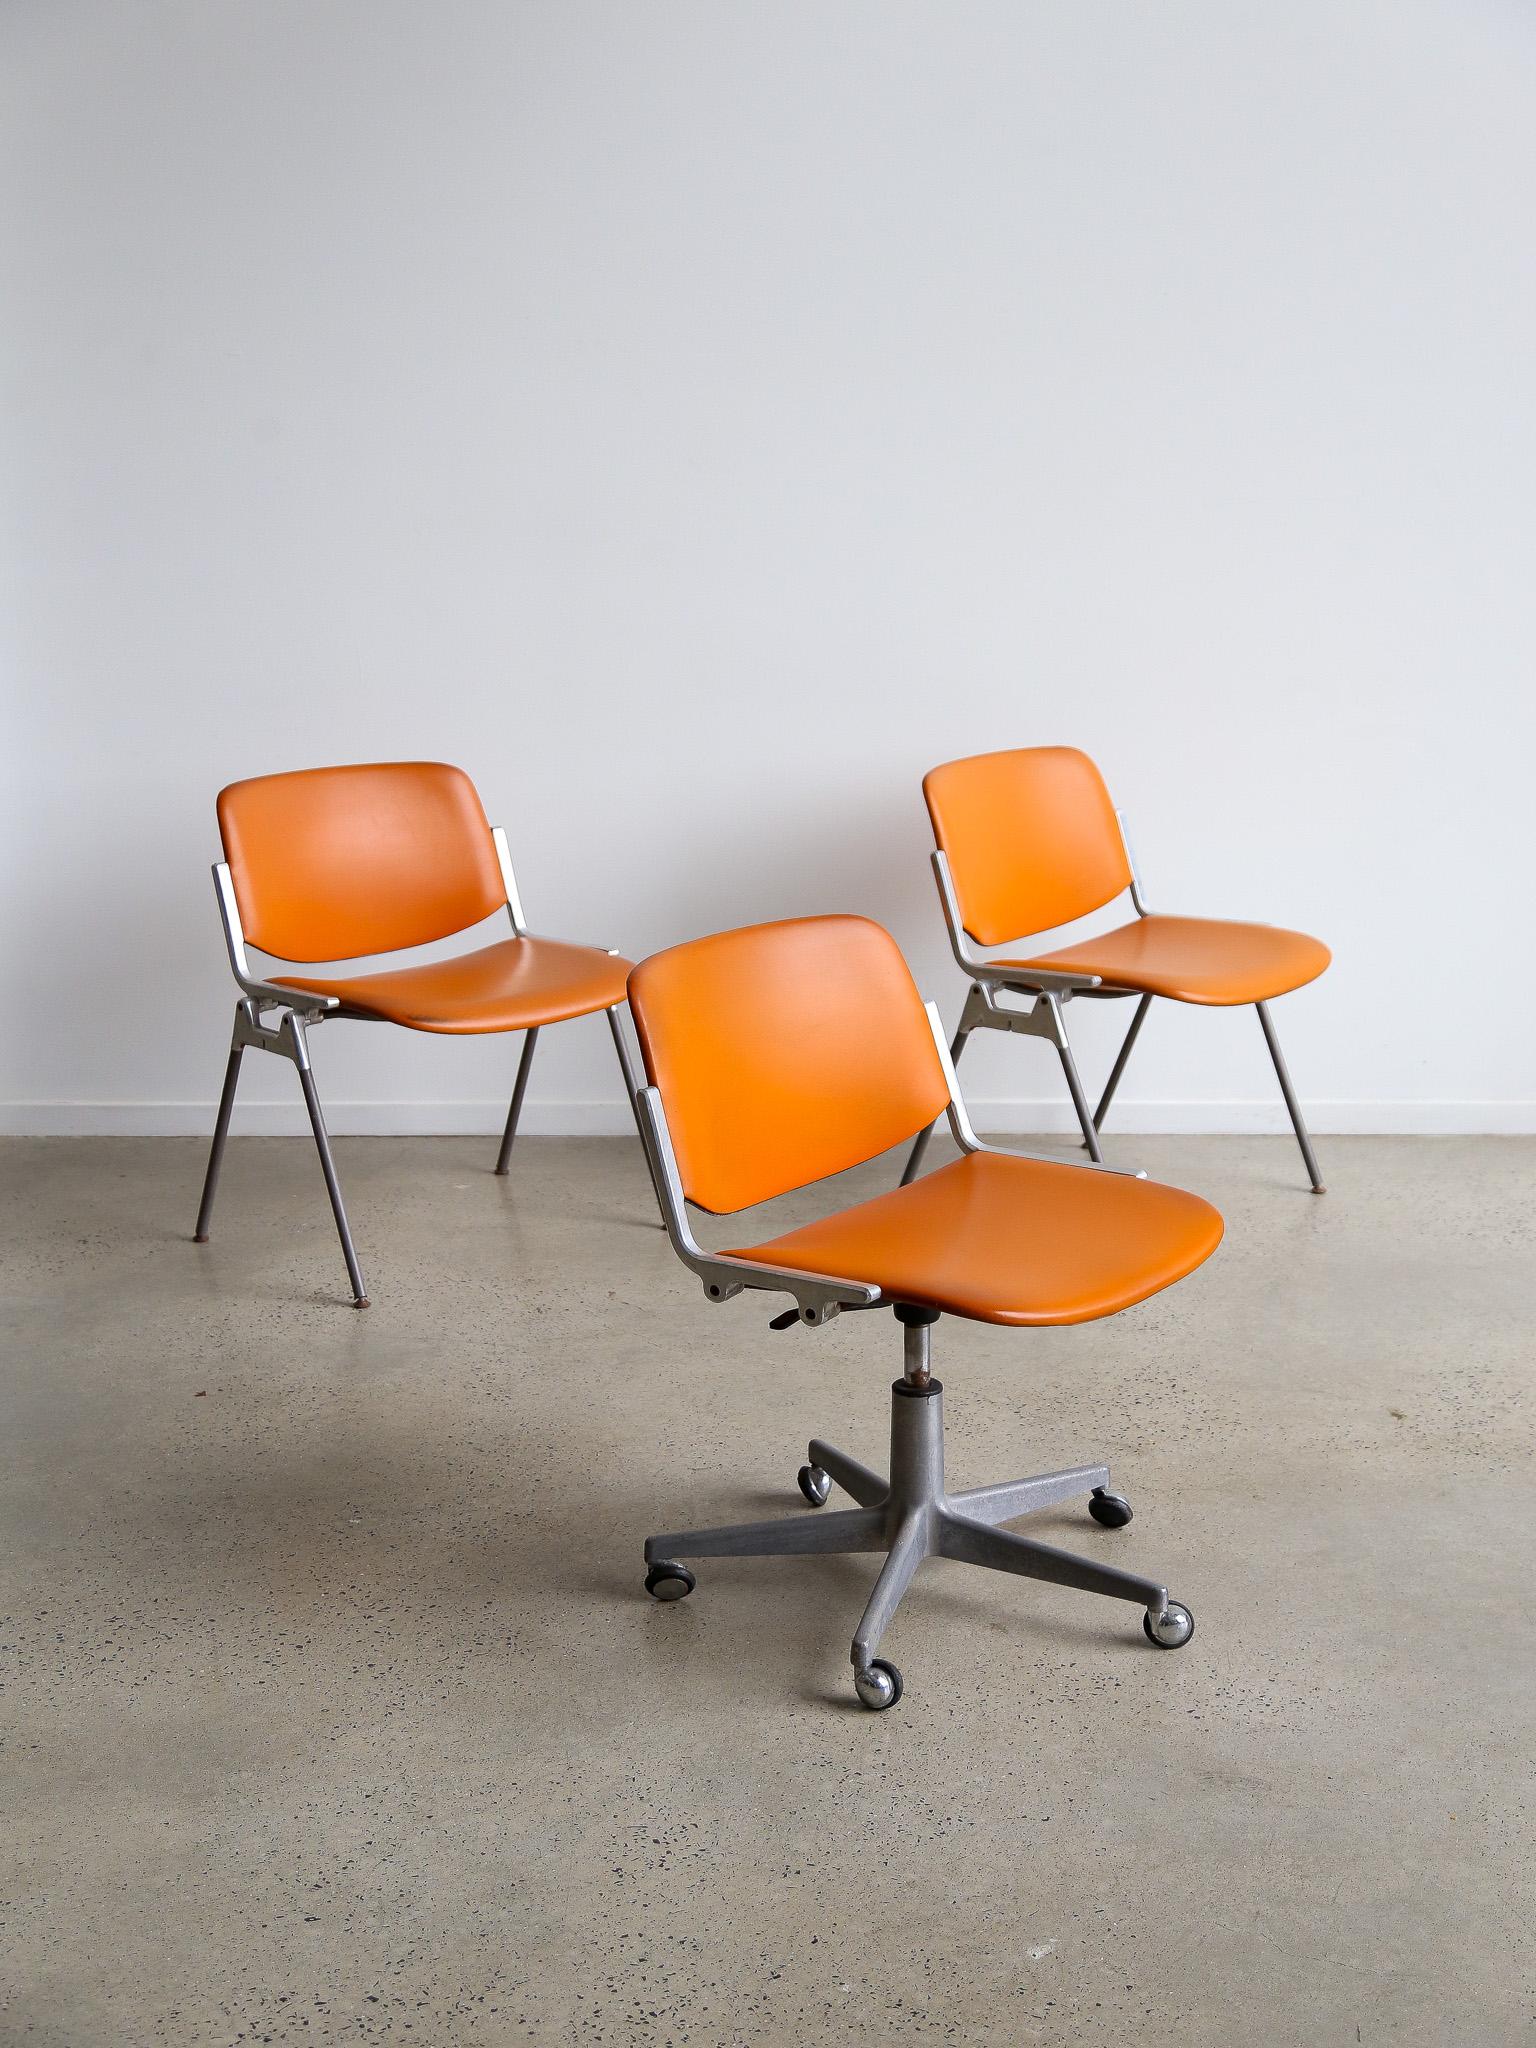 This set of two DSC 106 chairs was designed by Giancarlo Piretti for the Italian Castelli in 1965. It is one of the best-known models of the brand's chairs and is still an object with an innovative and attractive design. The elegant interweaving of